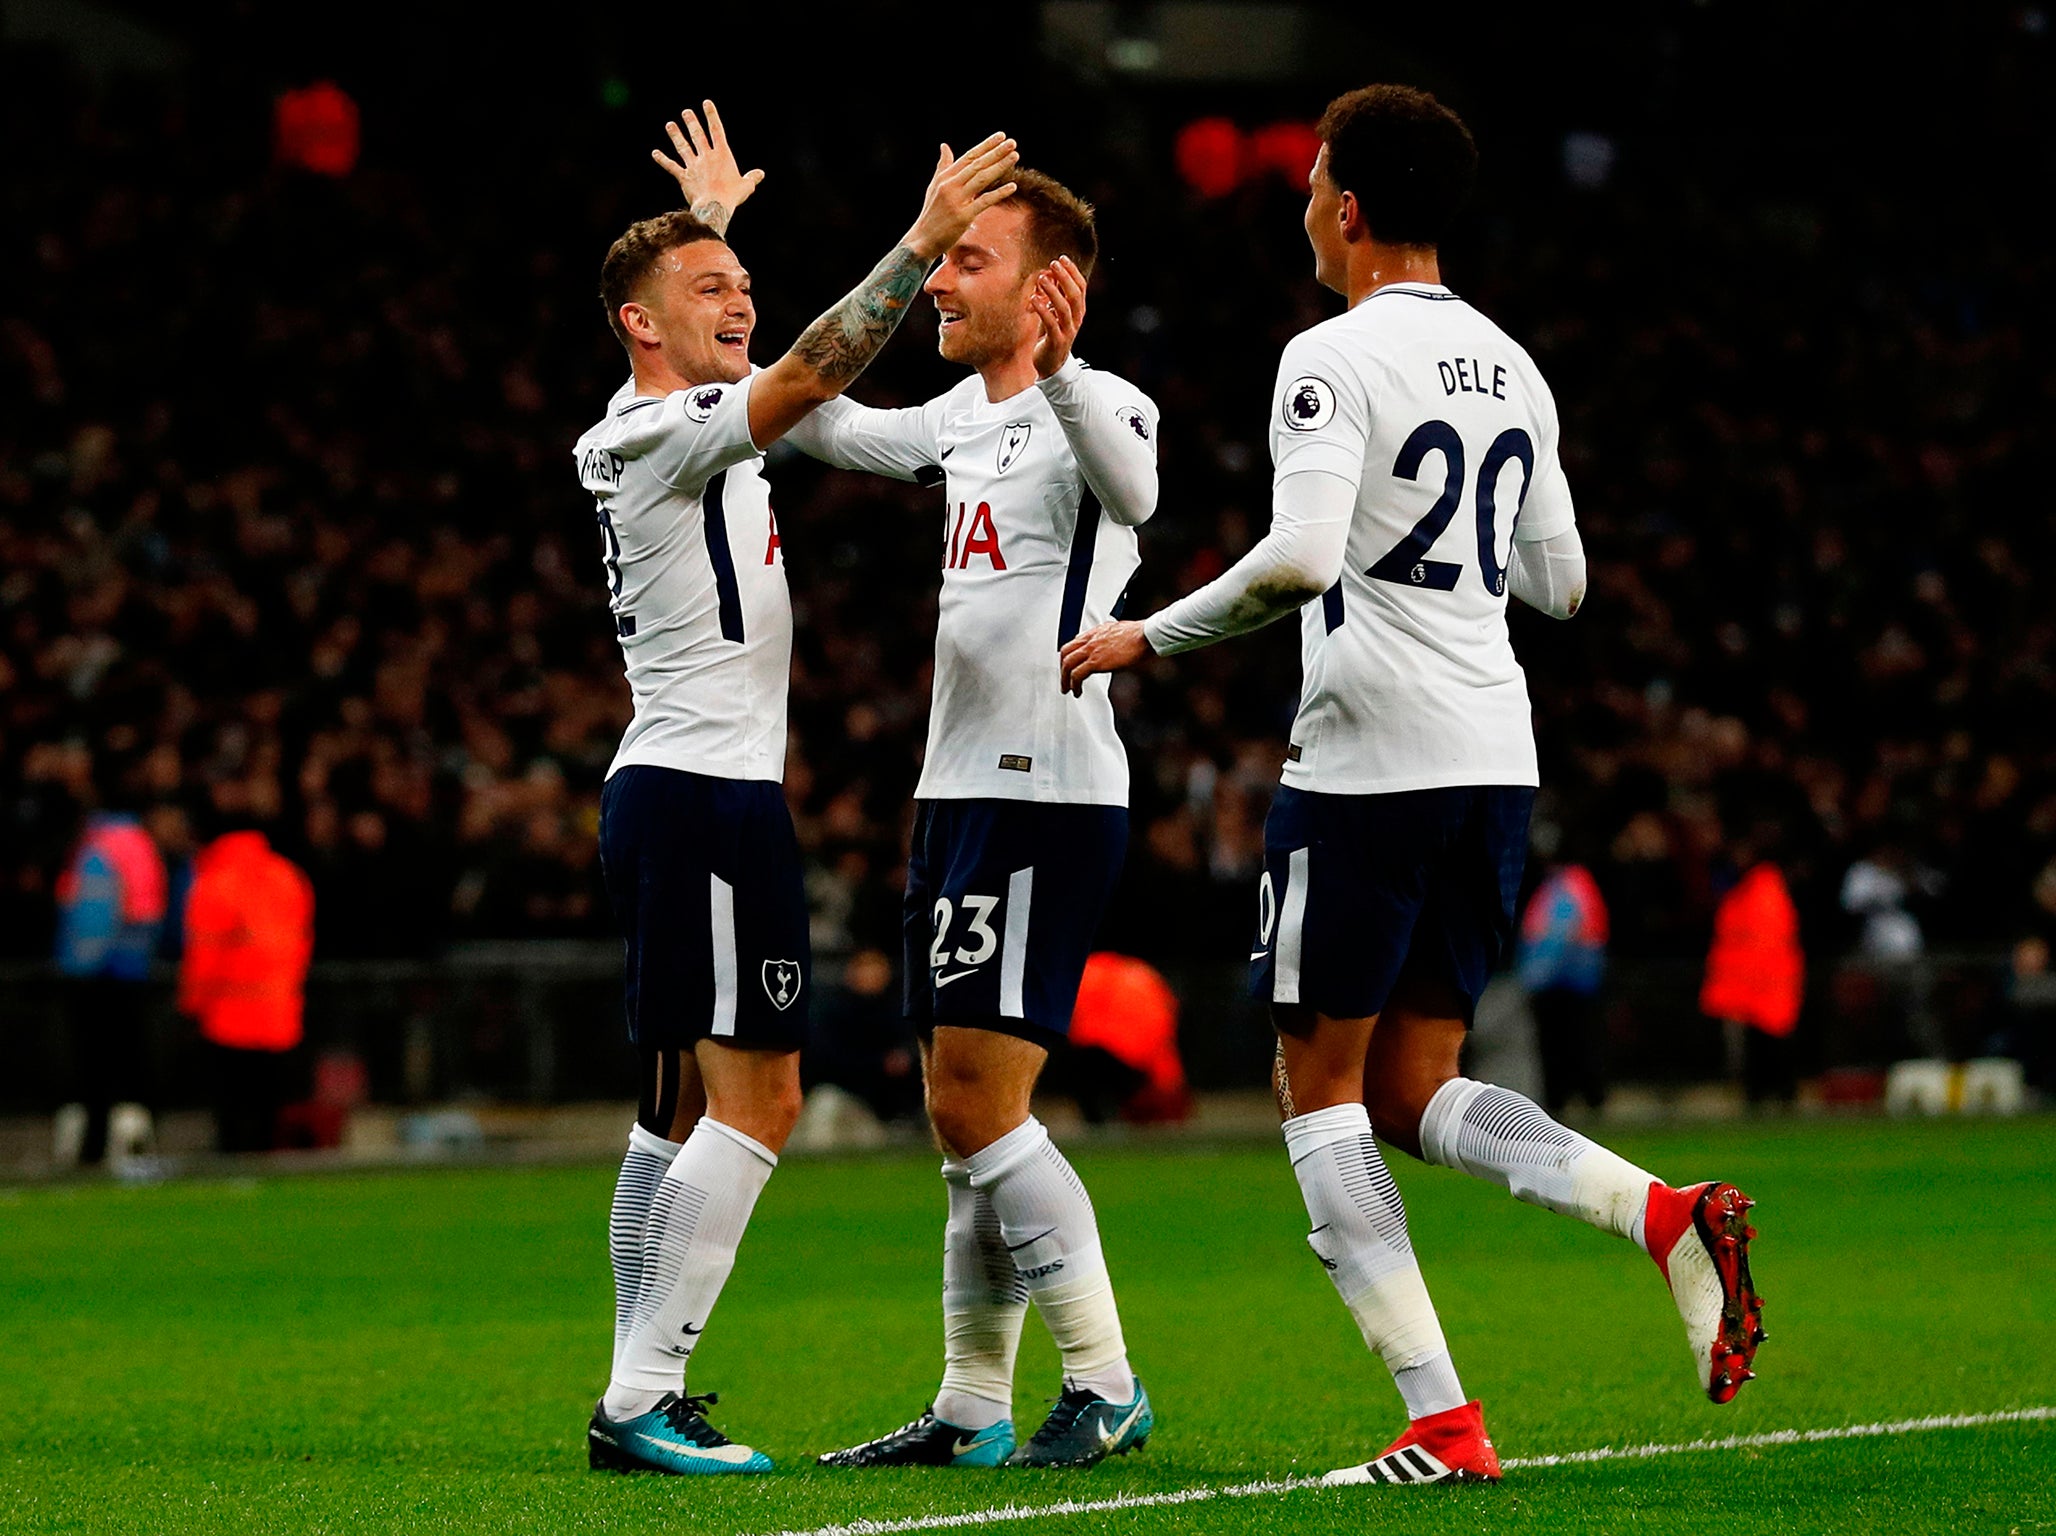 Spurs were superb as they put Manchester United to the sword